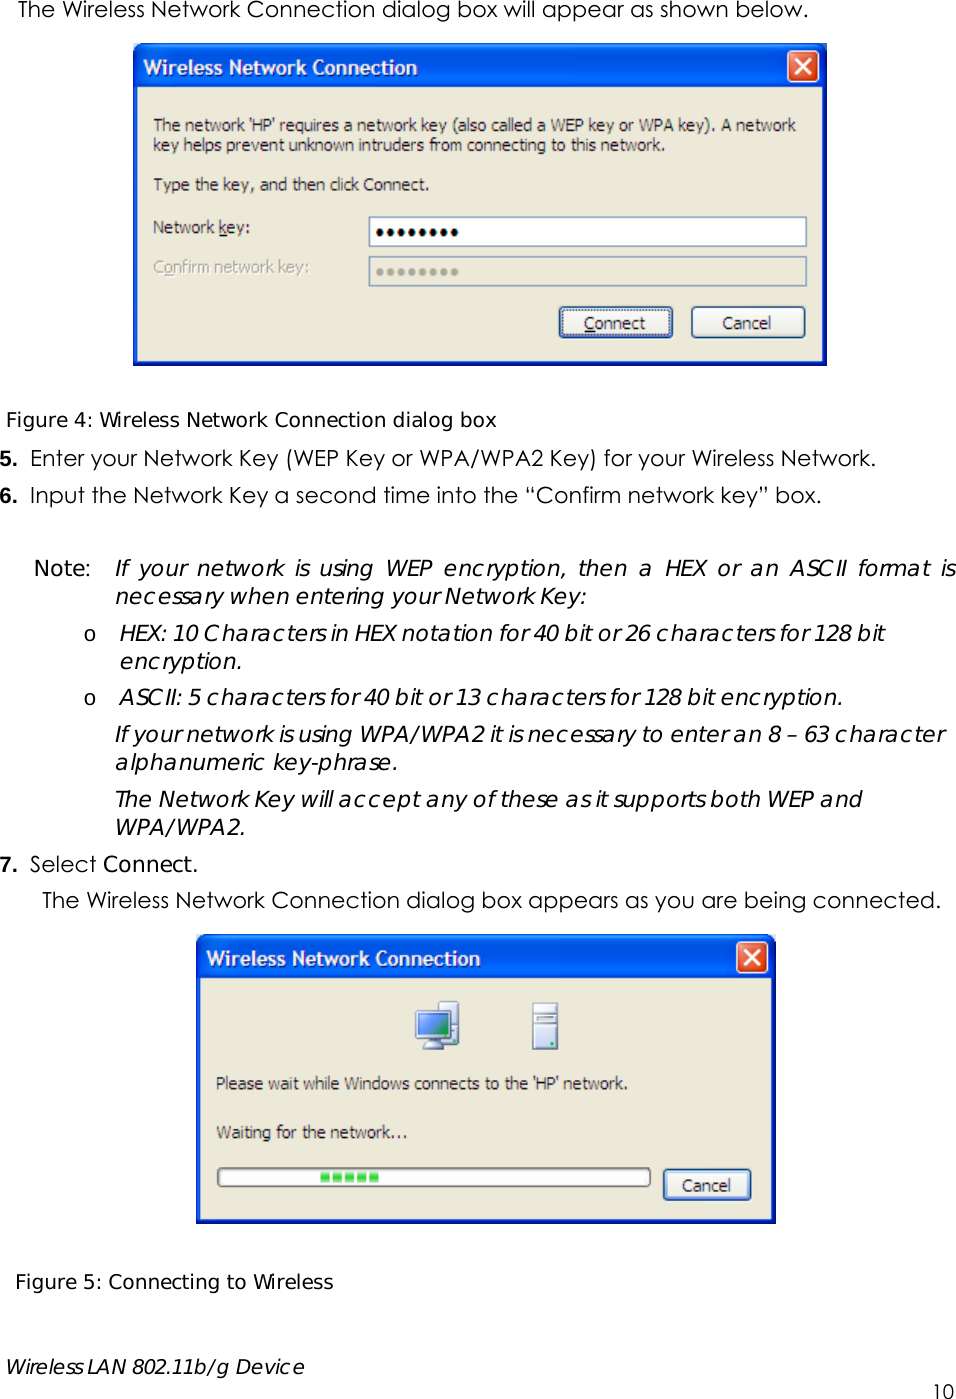     Wireless LAN 802.11b/g Device        10 The Wireless Network Connection dialog box will appear as shown below.    Figure 4: Wireless Network Connection dialog box 5.  Enter your Network Key (WEP Key or WPA/WPA2 Key) for your Wireless Network. 6.  Input the Network Key a second time into the “Confirm network key” box.  Note:  If your network is using WEP encryption, then a HEX or an ASCII format is necessary when entering your Network Key: o HEX: 10 Characters in HEX notation for 40 bit or 26 characters for 128 bit encryption. o ASCII: 5 characters for 40 bit or 13 characters for 128 bit encryption. If your network is using WPA/WPA2 it is necessary to enter an 8 – 63 character alphanumeric key-phrase.   The Network Key will accept any of these as it supports both WEP and WPA/WPA2. 7.  Select Connect. The Wireless Network Connection dialog box appears as you are being connected.    Figure 5: Connecting to Wireless  